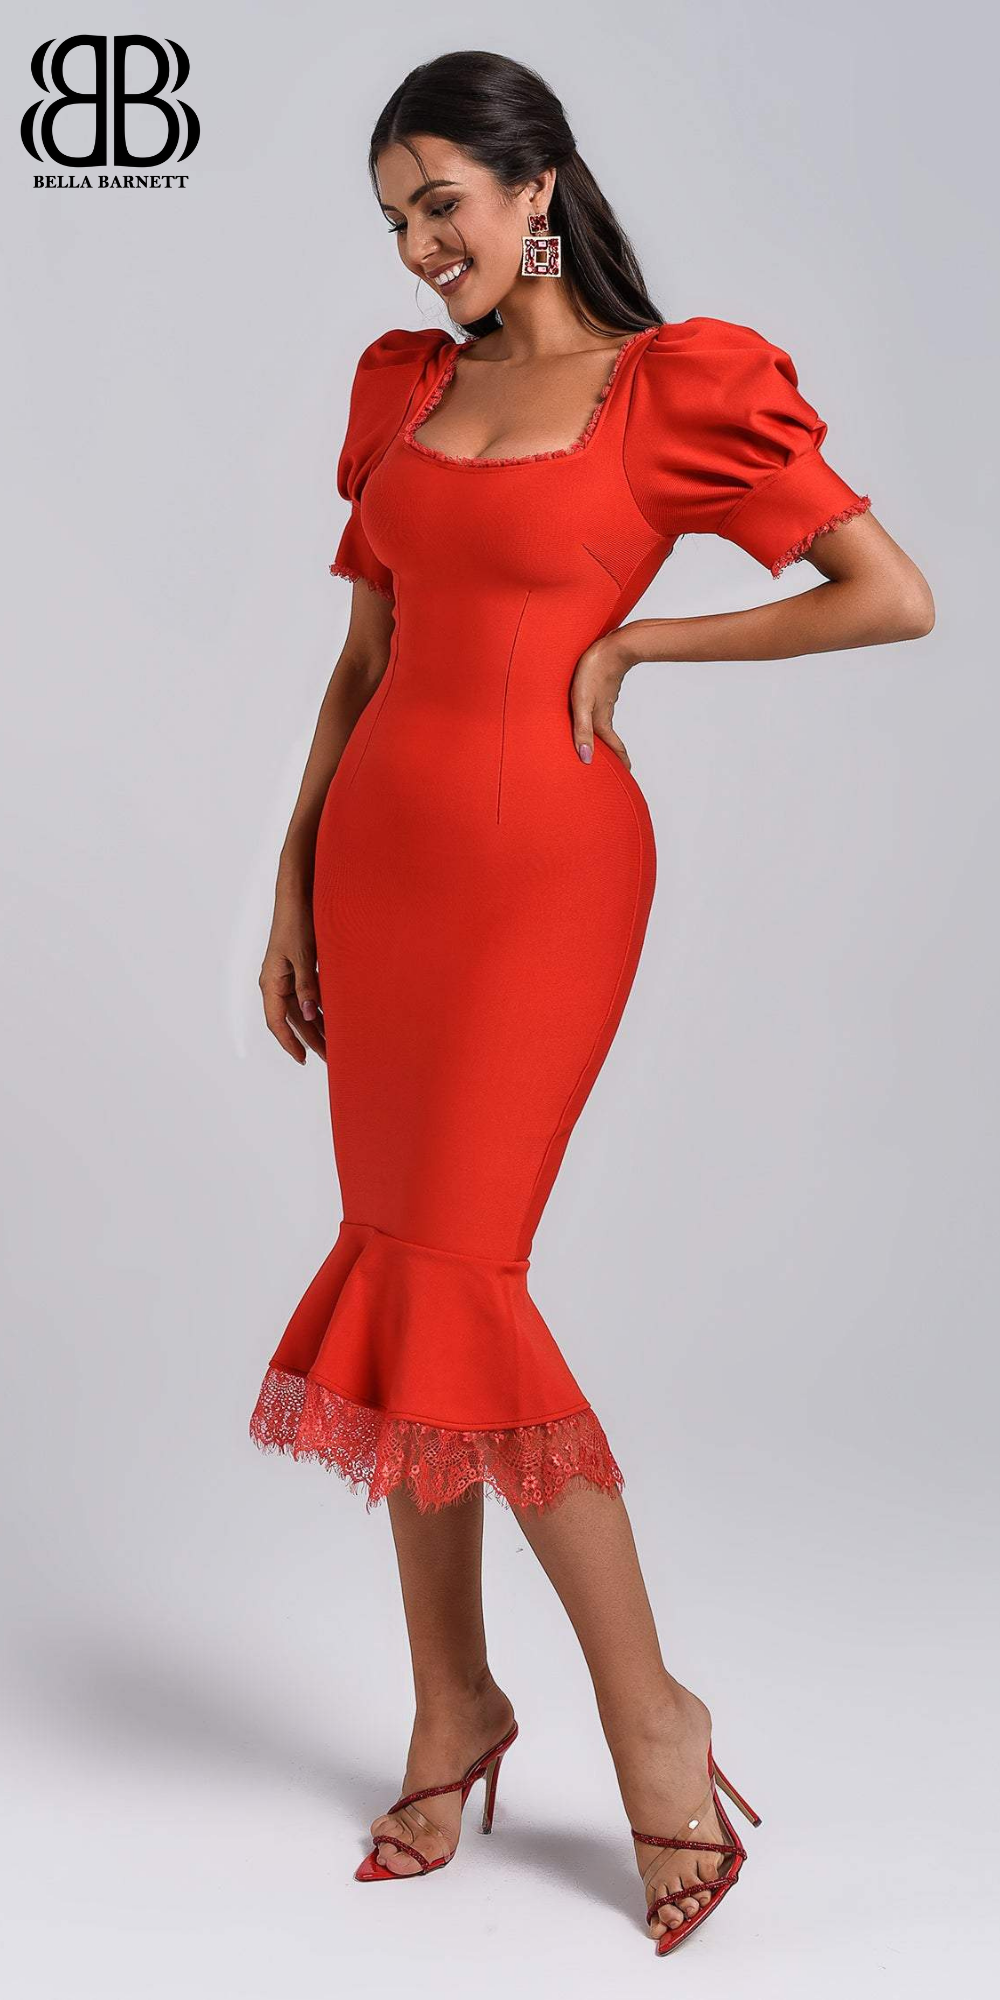 Red Bandage Dress Outfit Ideas